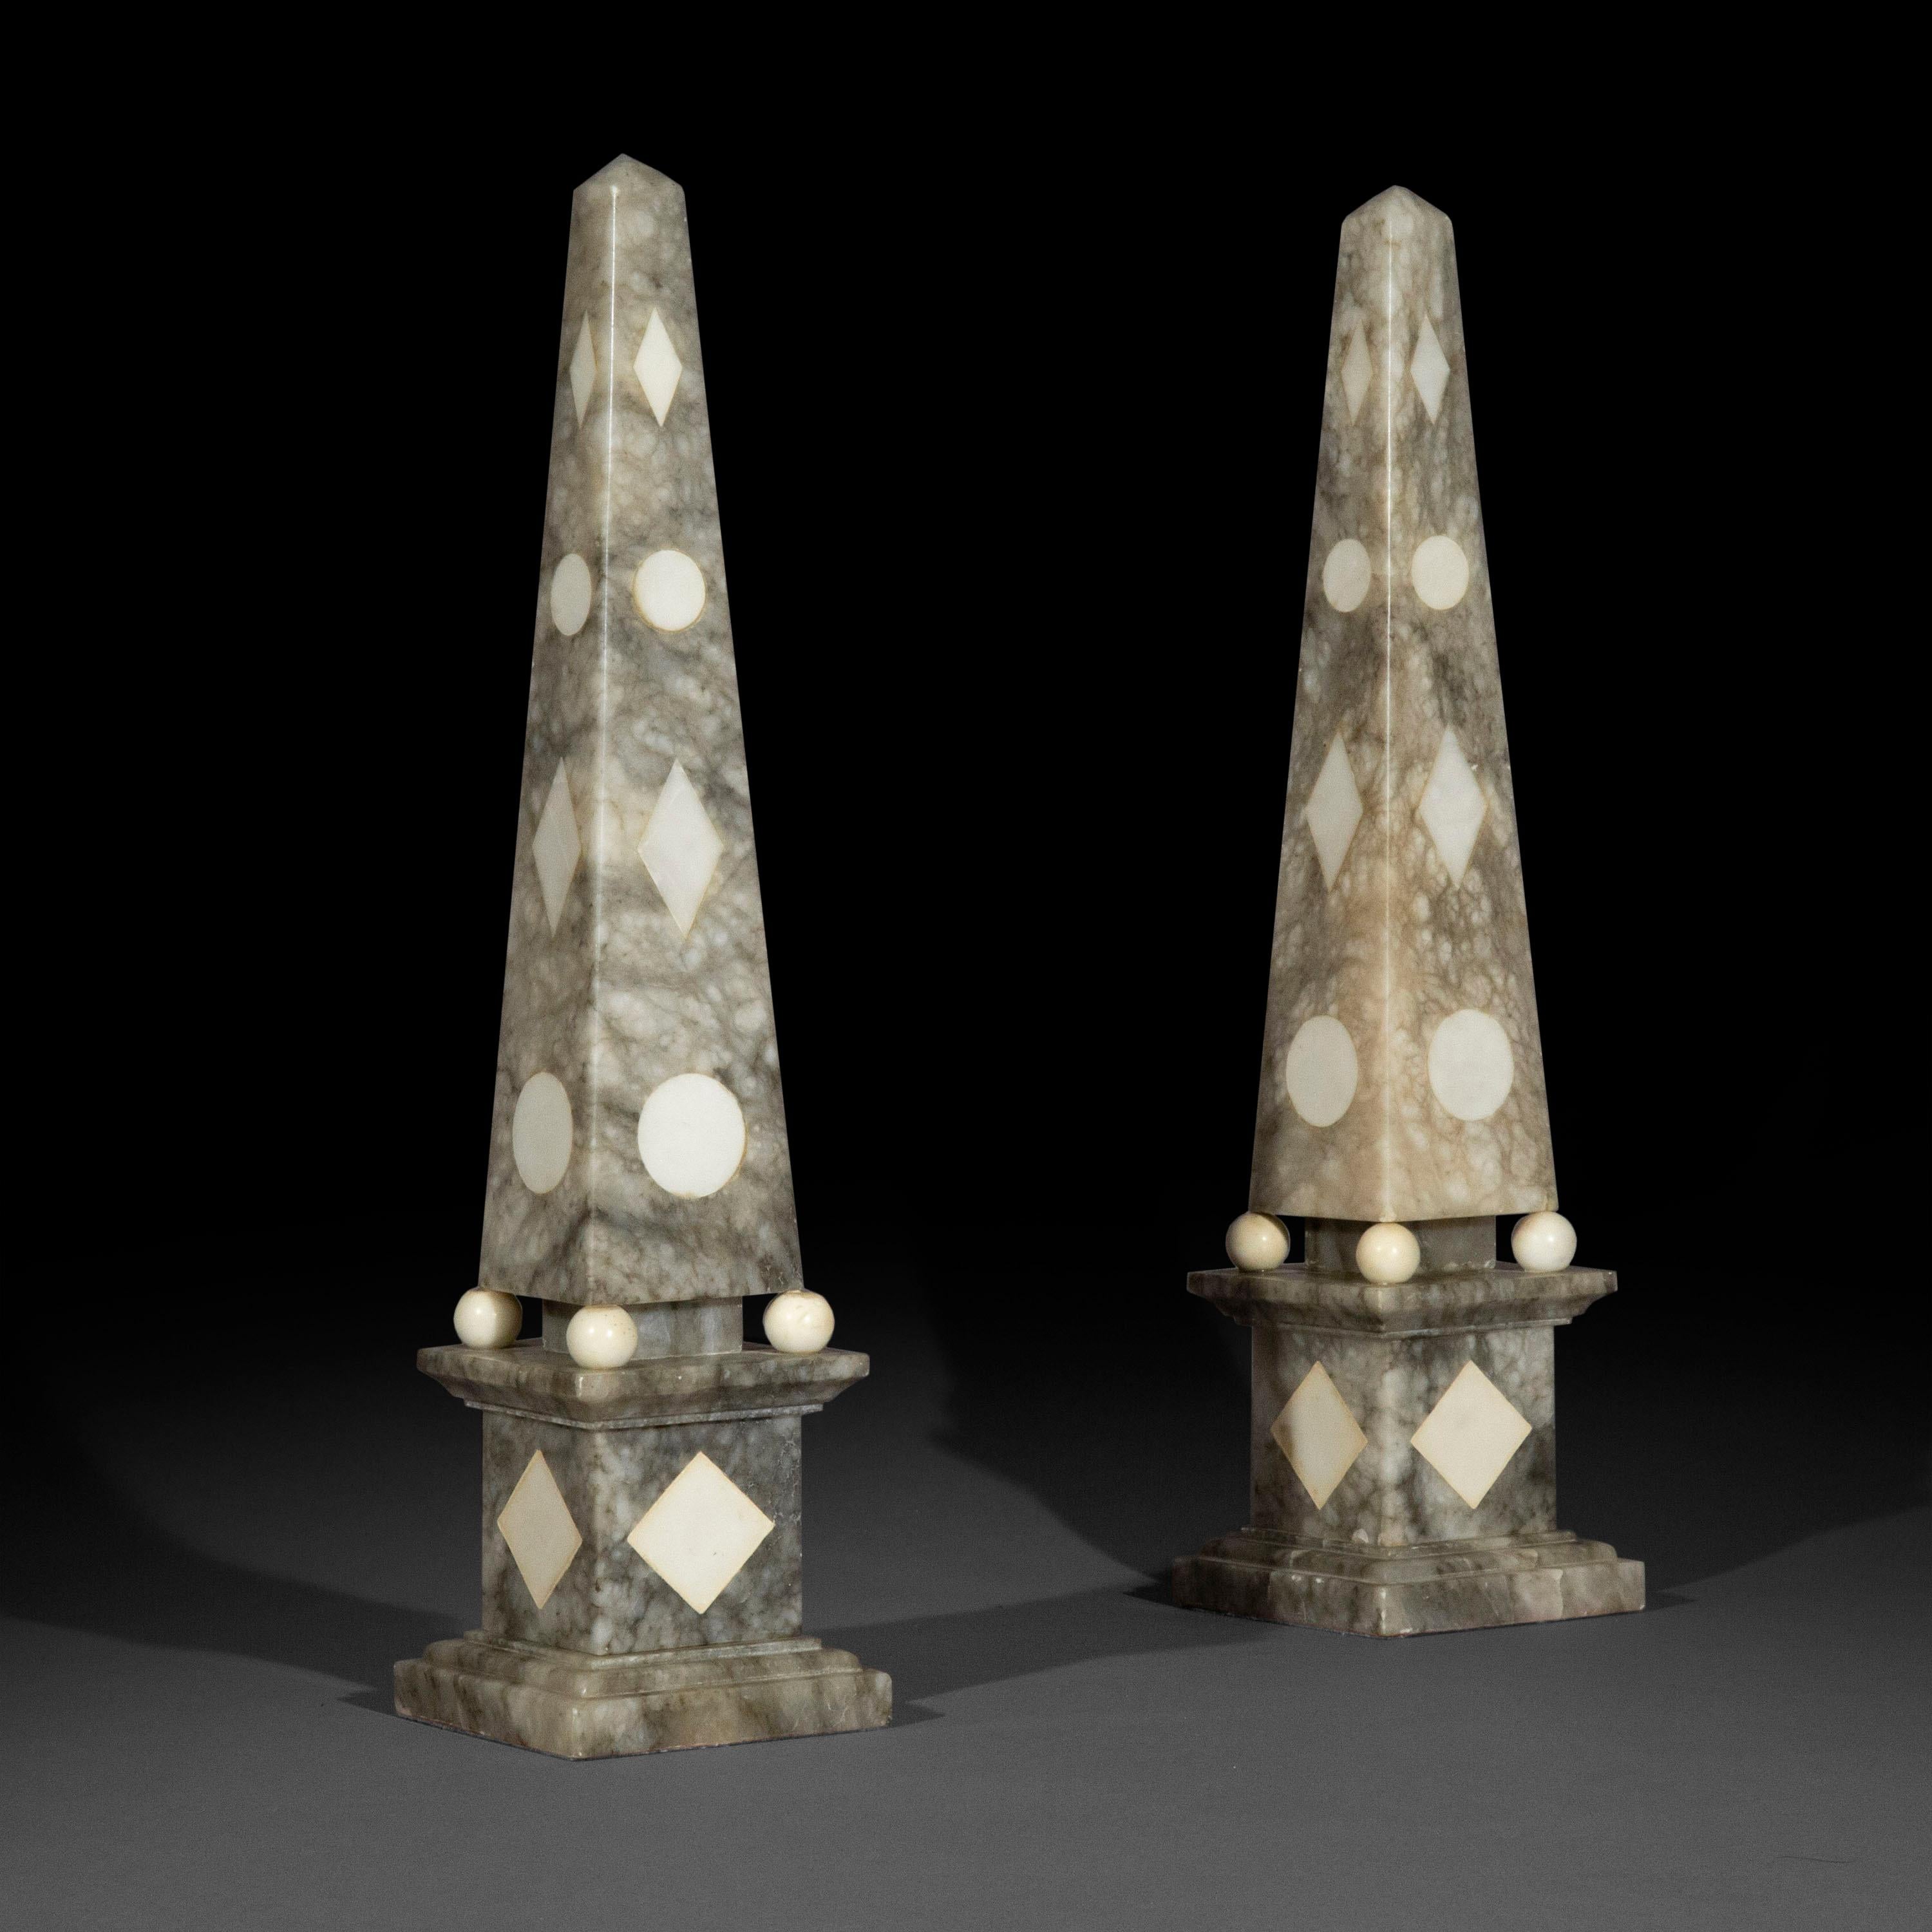 A very chic pair of Grand Tour marble obelisks
Italy, 20th century

Why we like them
Beautiful objects like this have always been a favourite souvenir from the Grand Tour. Thanks to their timeless form, at the same time architectural but also highly